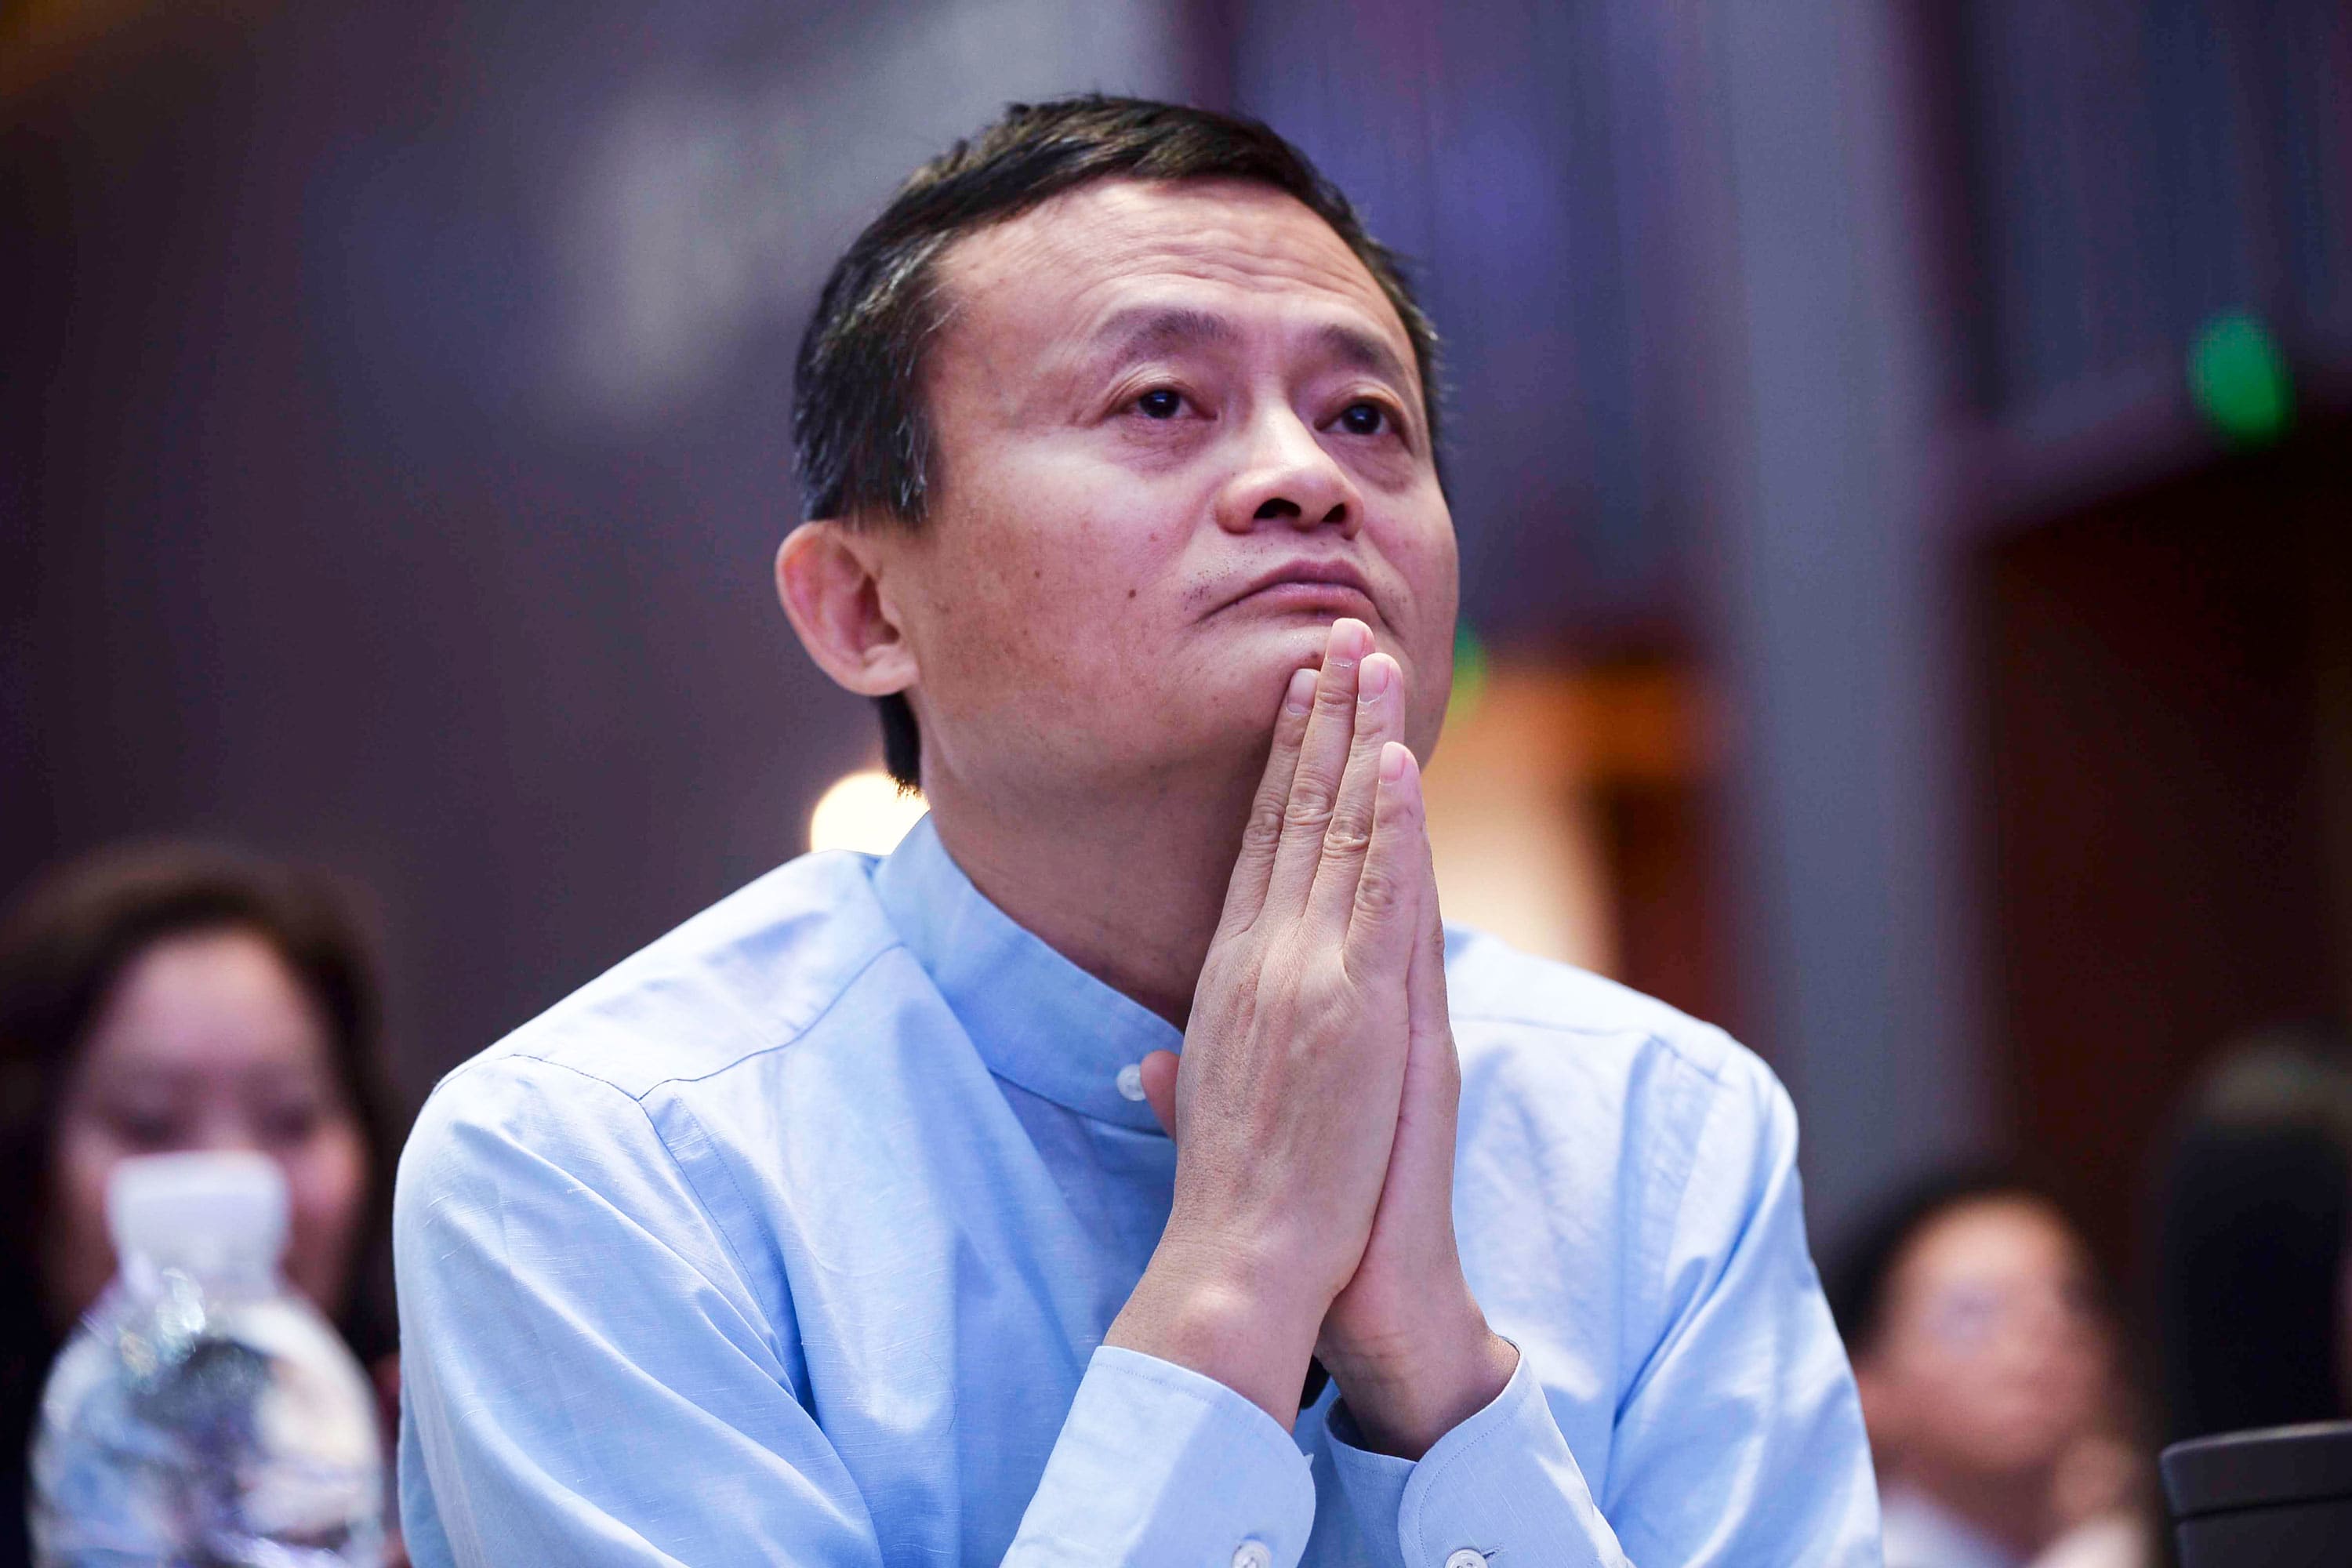 Jack Ma’s disappearance fuels speculation about the billionaire’s whereabouts